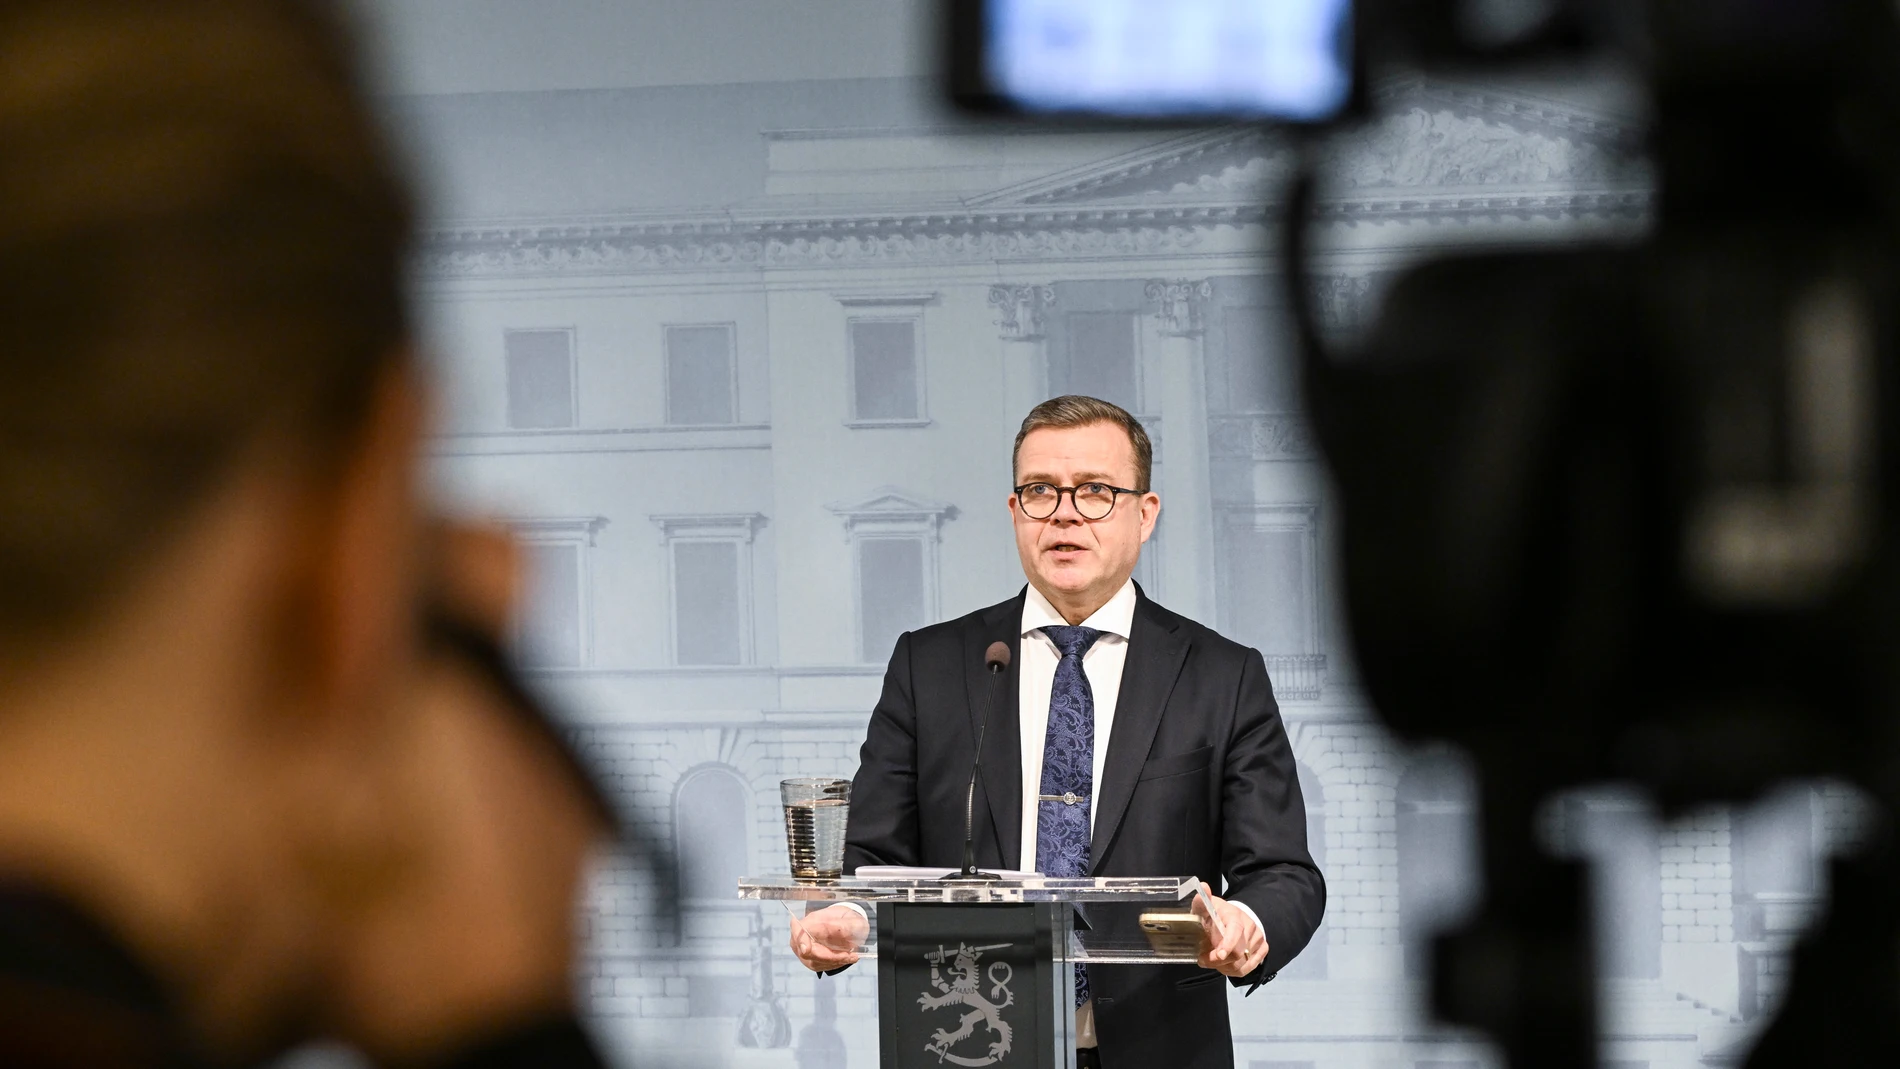 Helsinki (Finland), 16/11/2023.- Finnish Prime Minister Petteri Orpo speaks during a press conference on new border measures in Helsinki, Finland, 16 November 2023. Finland's government has decided to close four crossing points on its border with Russia, as part of measures to tighten border control between Finland and Russia. (Finlandia, Rusia) EFE/EPA/KIMMO BRANDT 